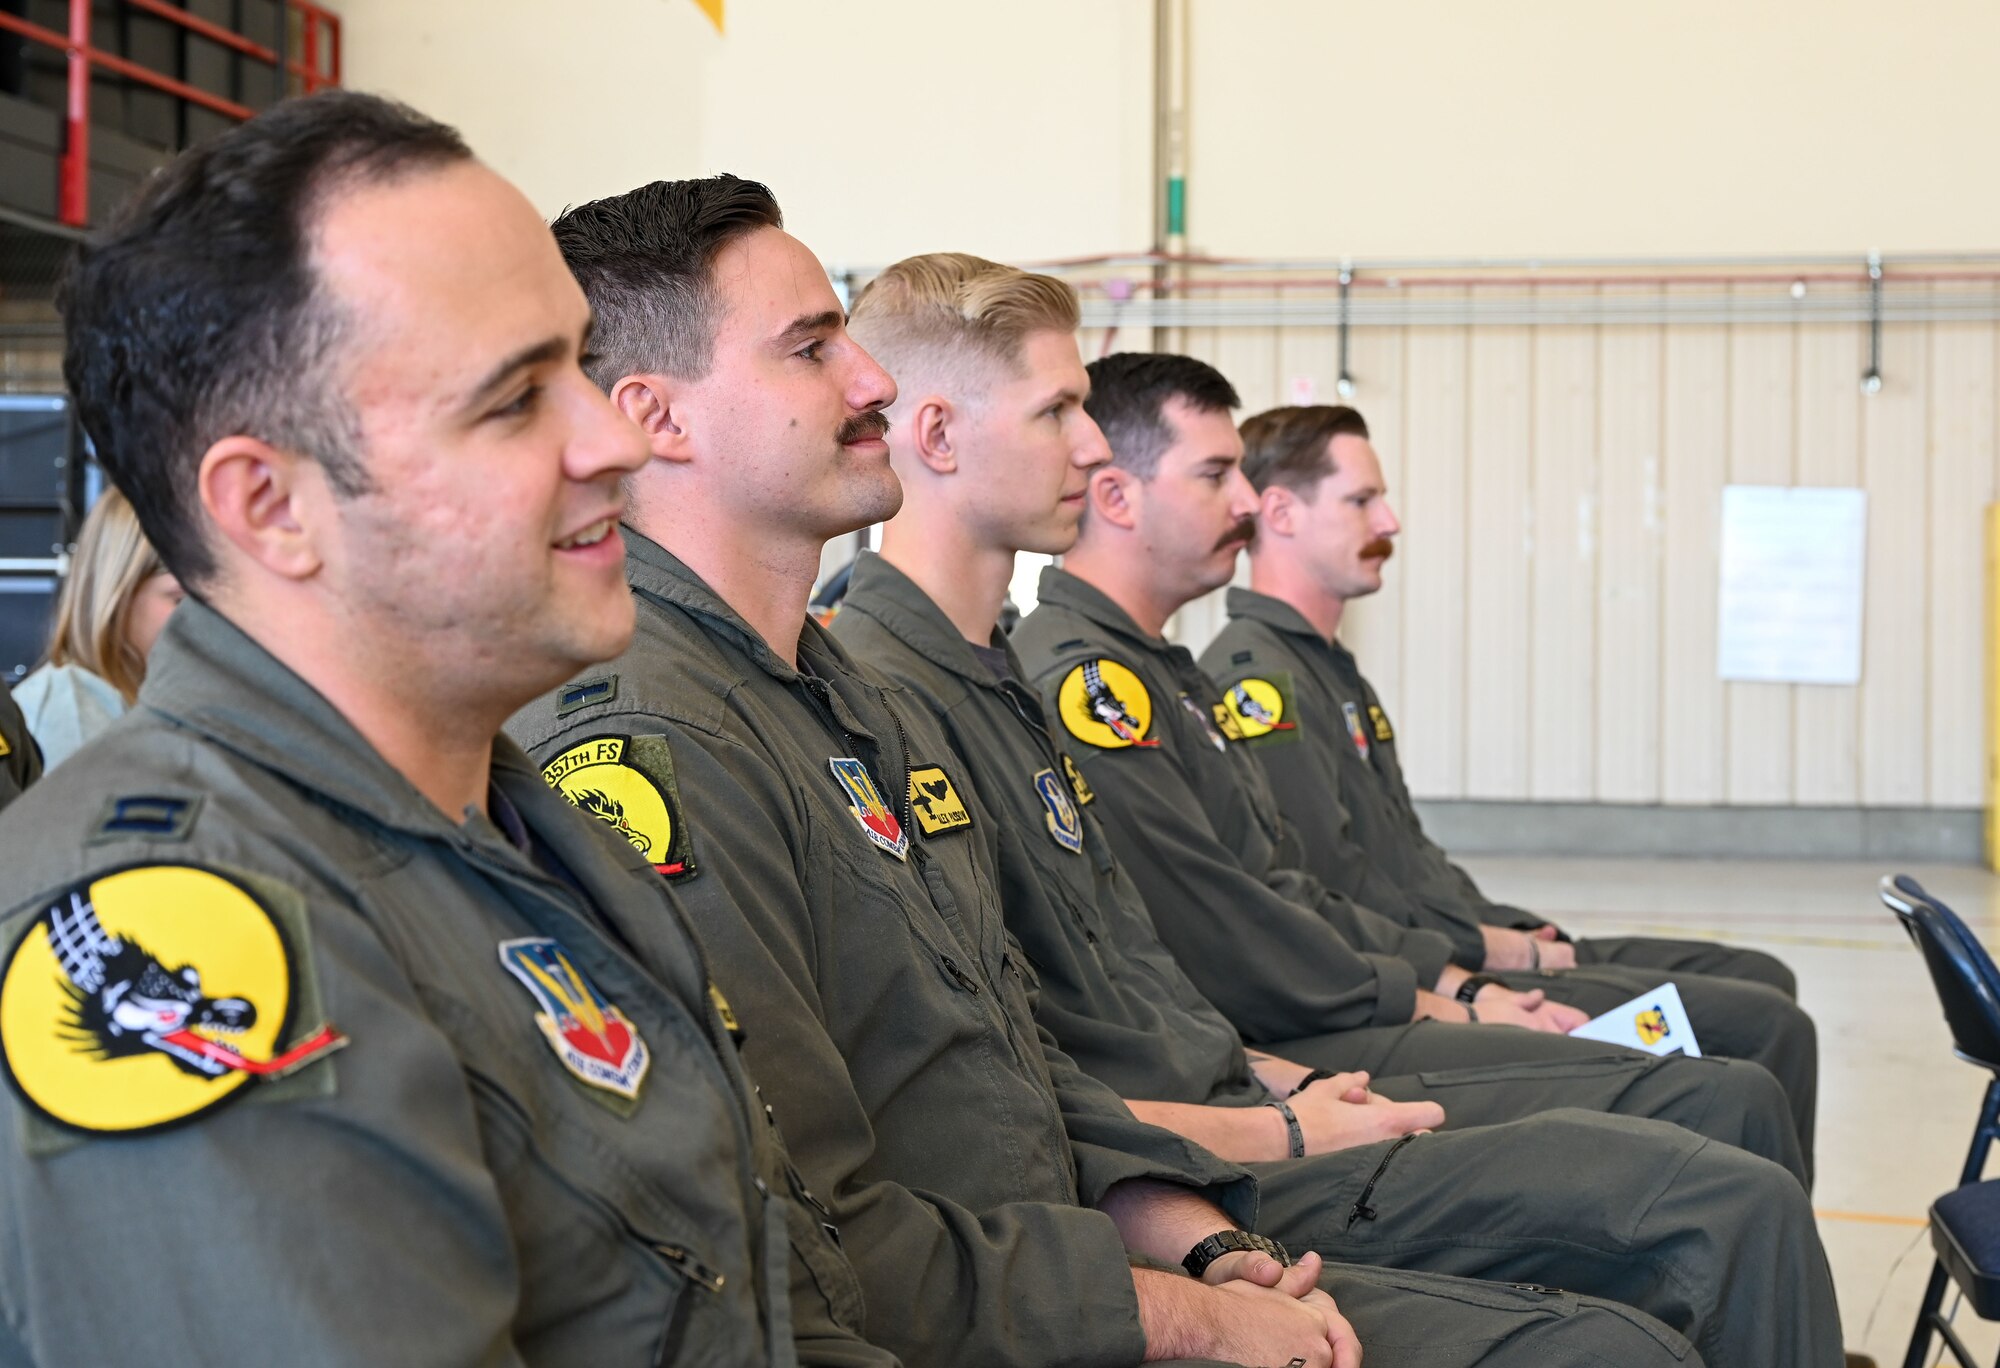 Pictured above is a group of Airmen seated during a ceremony.